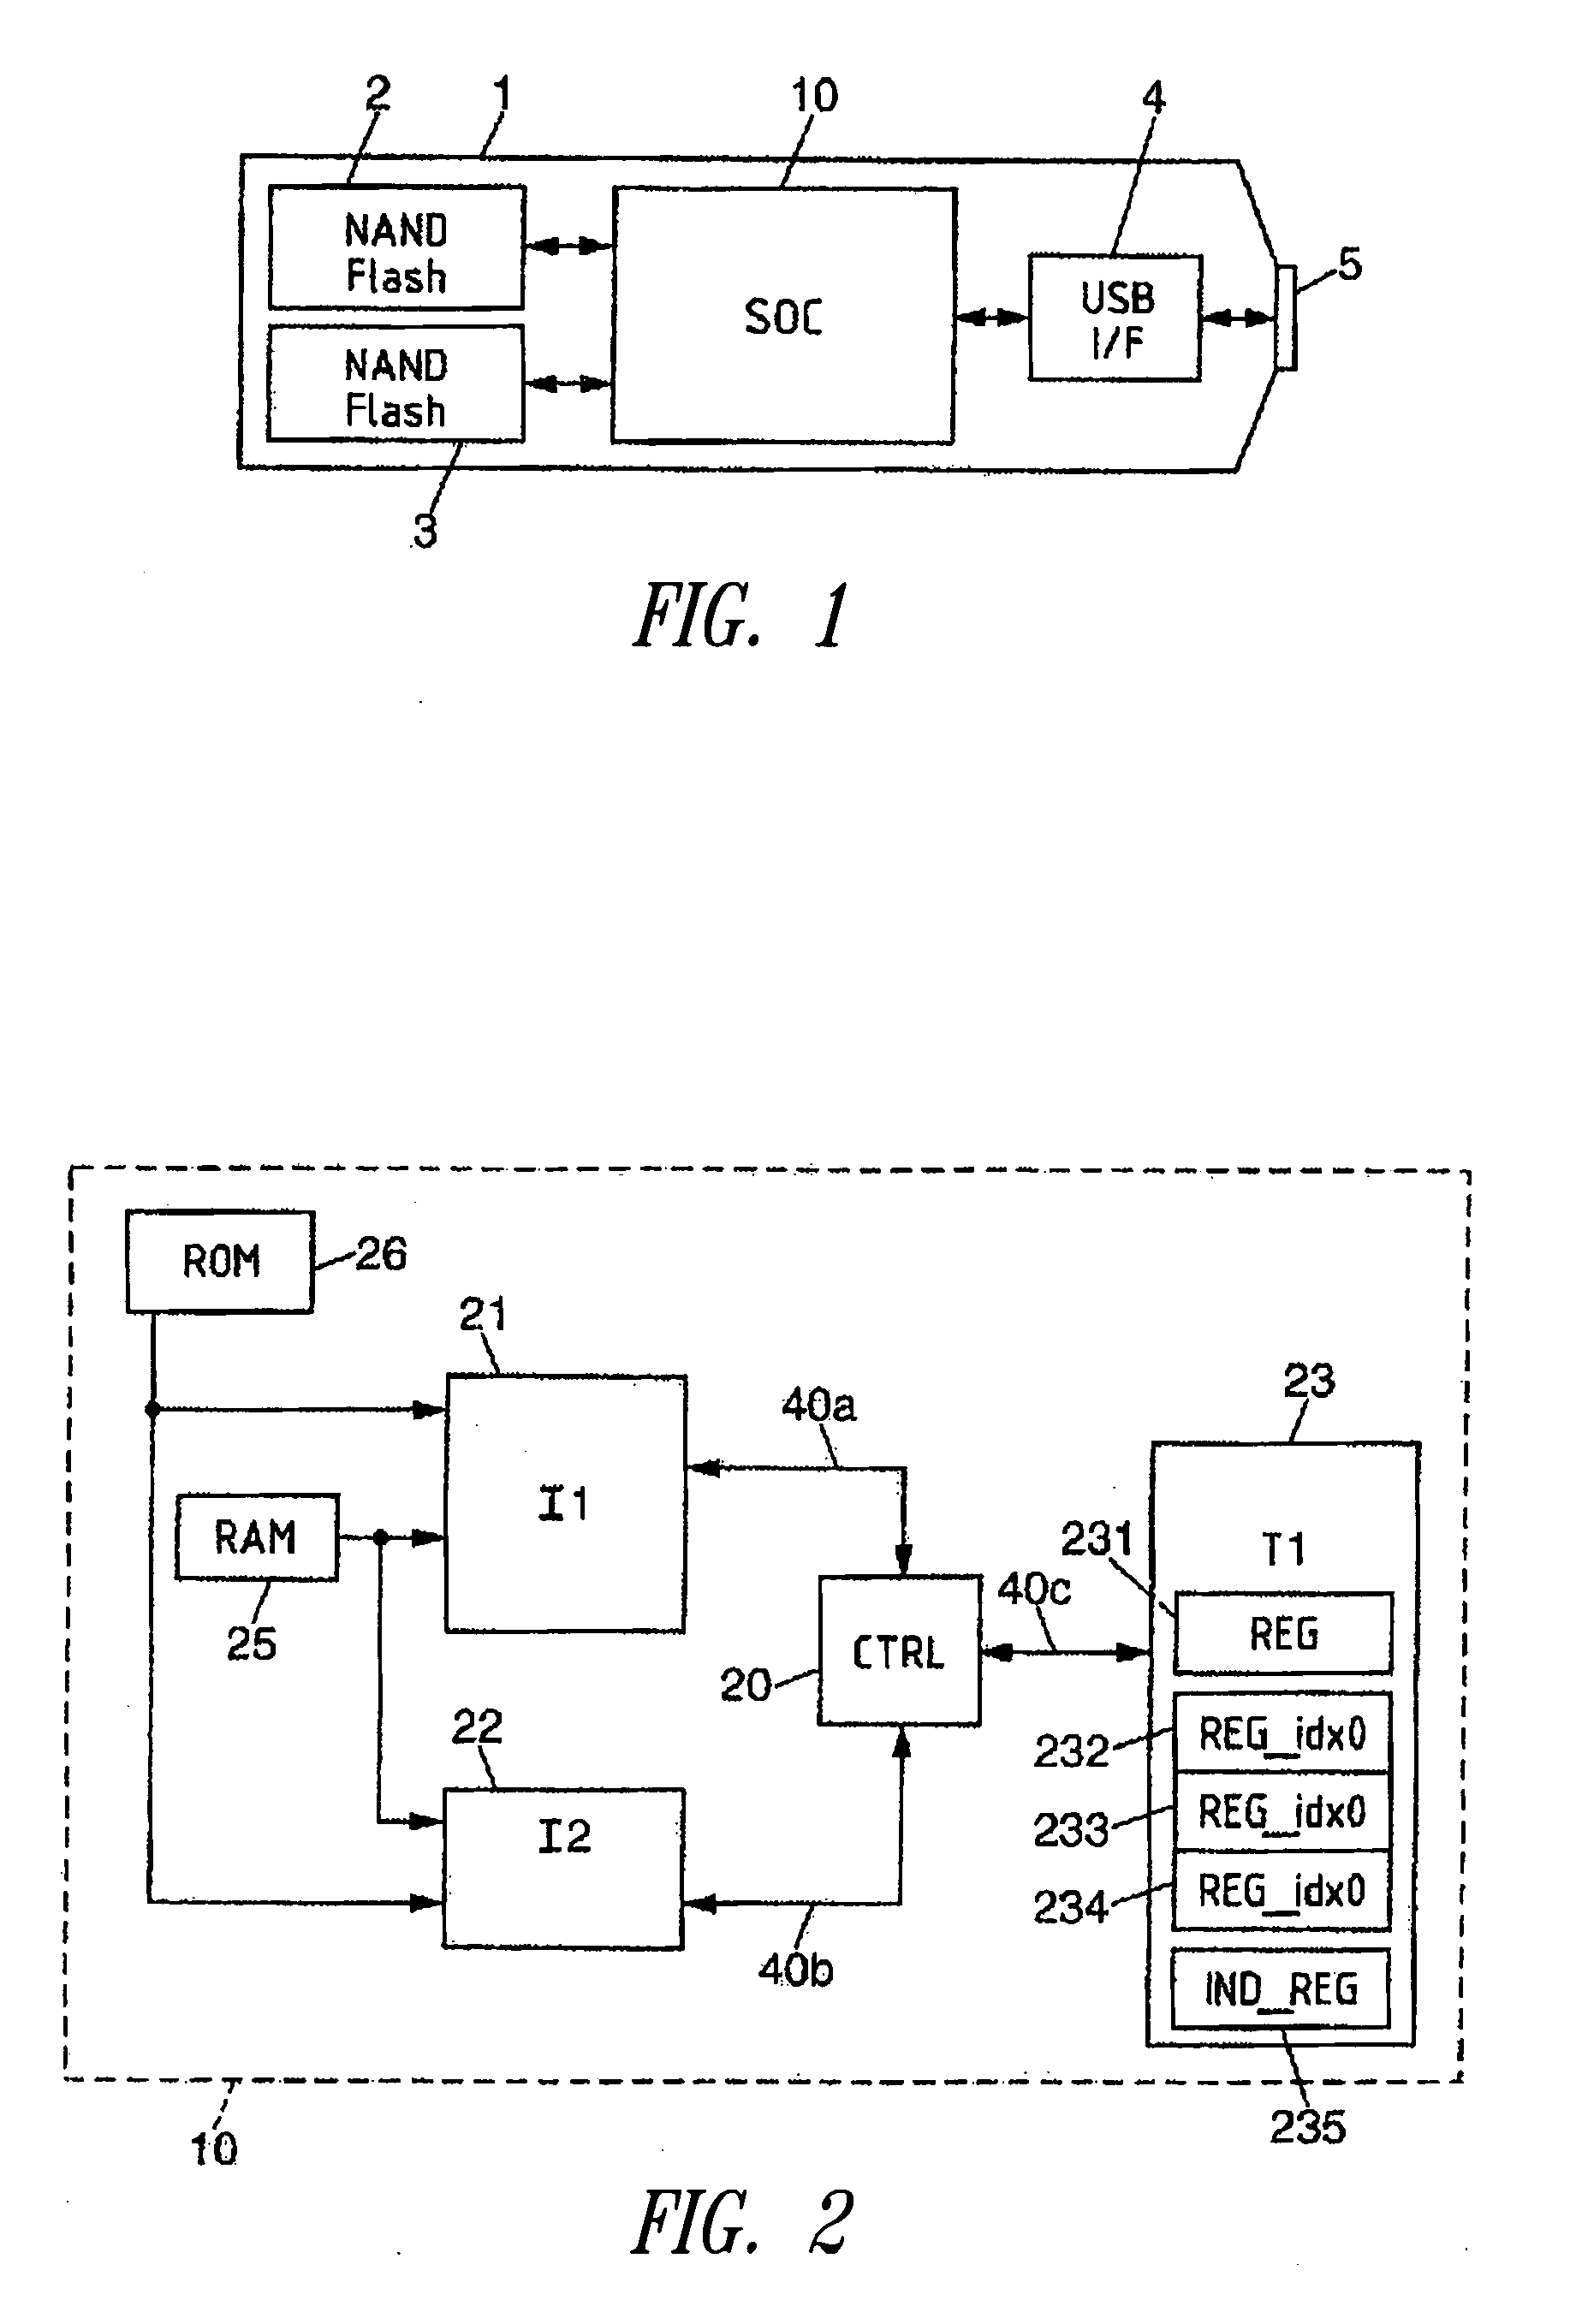 Management of indexed registers in a system on a chip